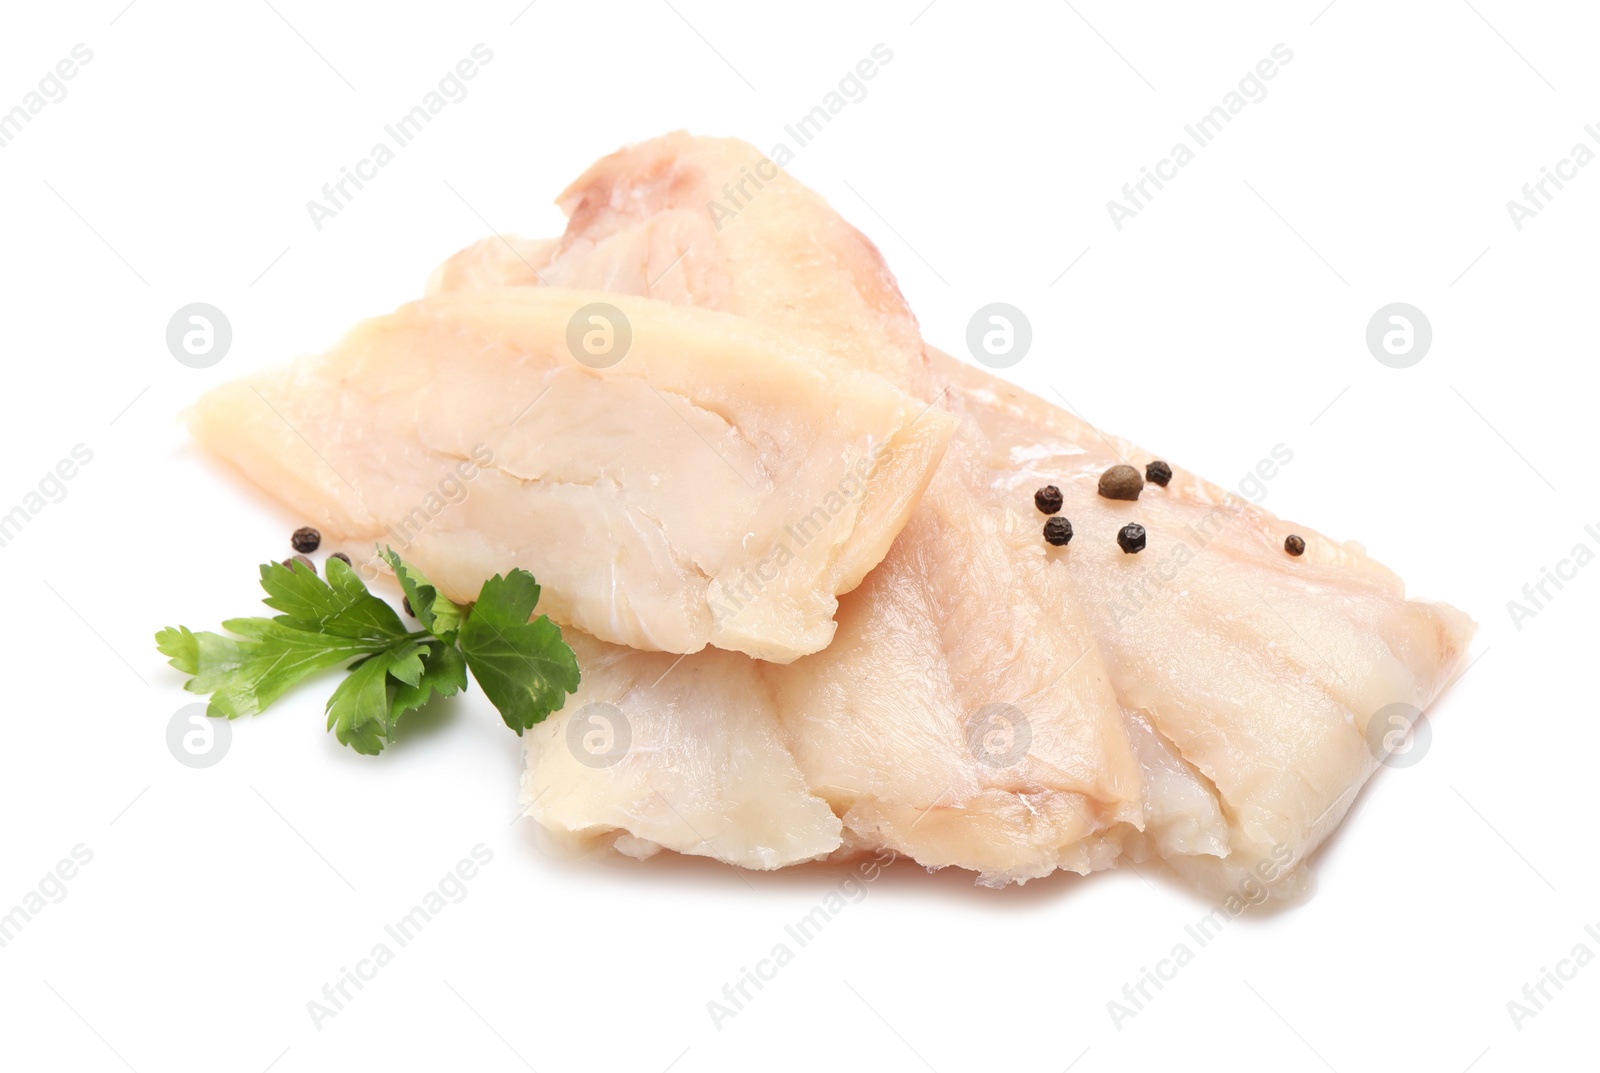 Photo of Pieces of raw cod fish, parsley and peppercorns isolated on white